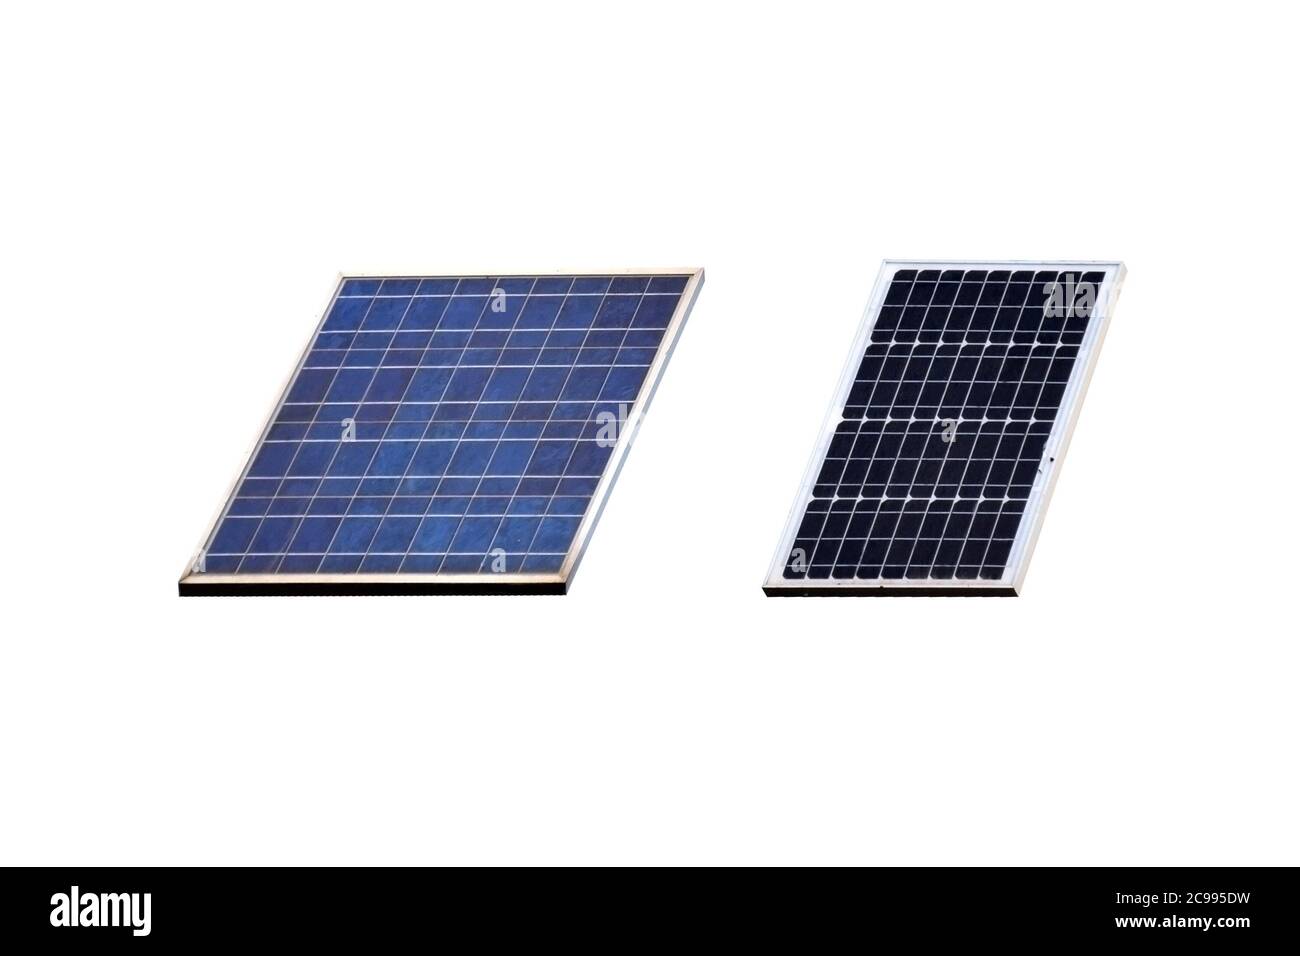 Photovoltaic solar panels Isolated two style on white background with Clipping path. Stock Photo